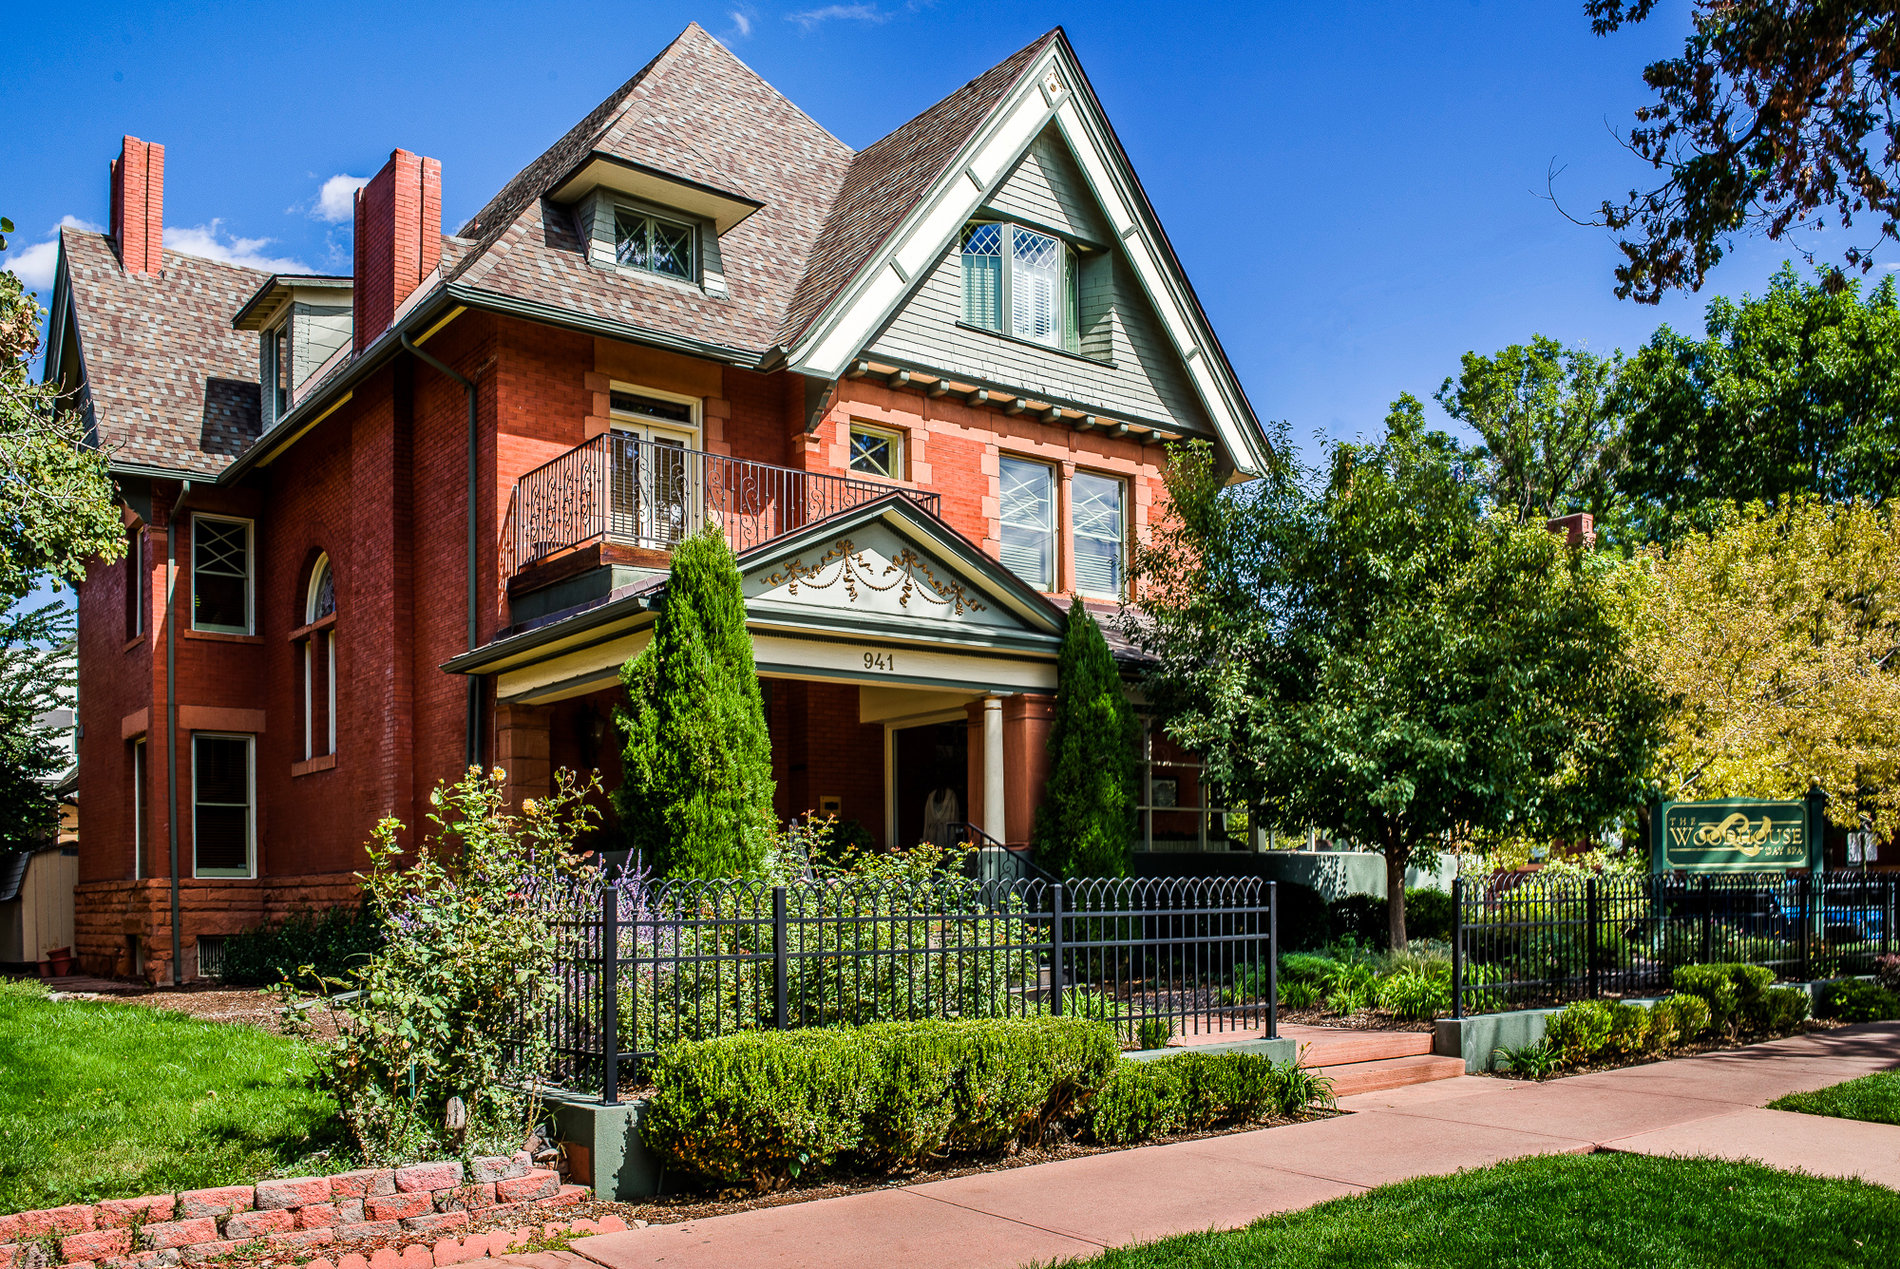 Woodhouse Day Spa Denver located in The Merritt House. The Merritt House is a historic home that was originally built for Senator Merritt in 1886.